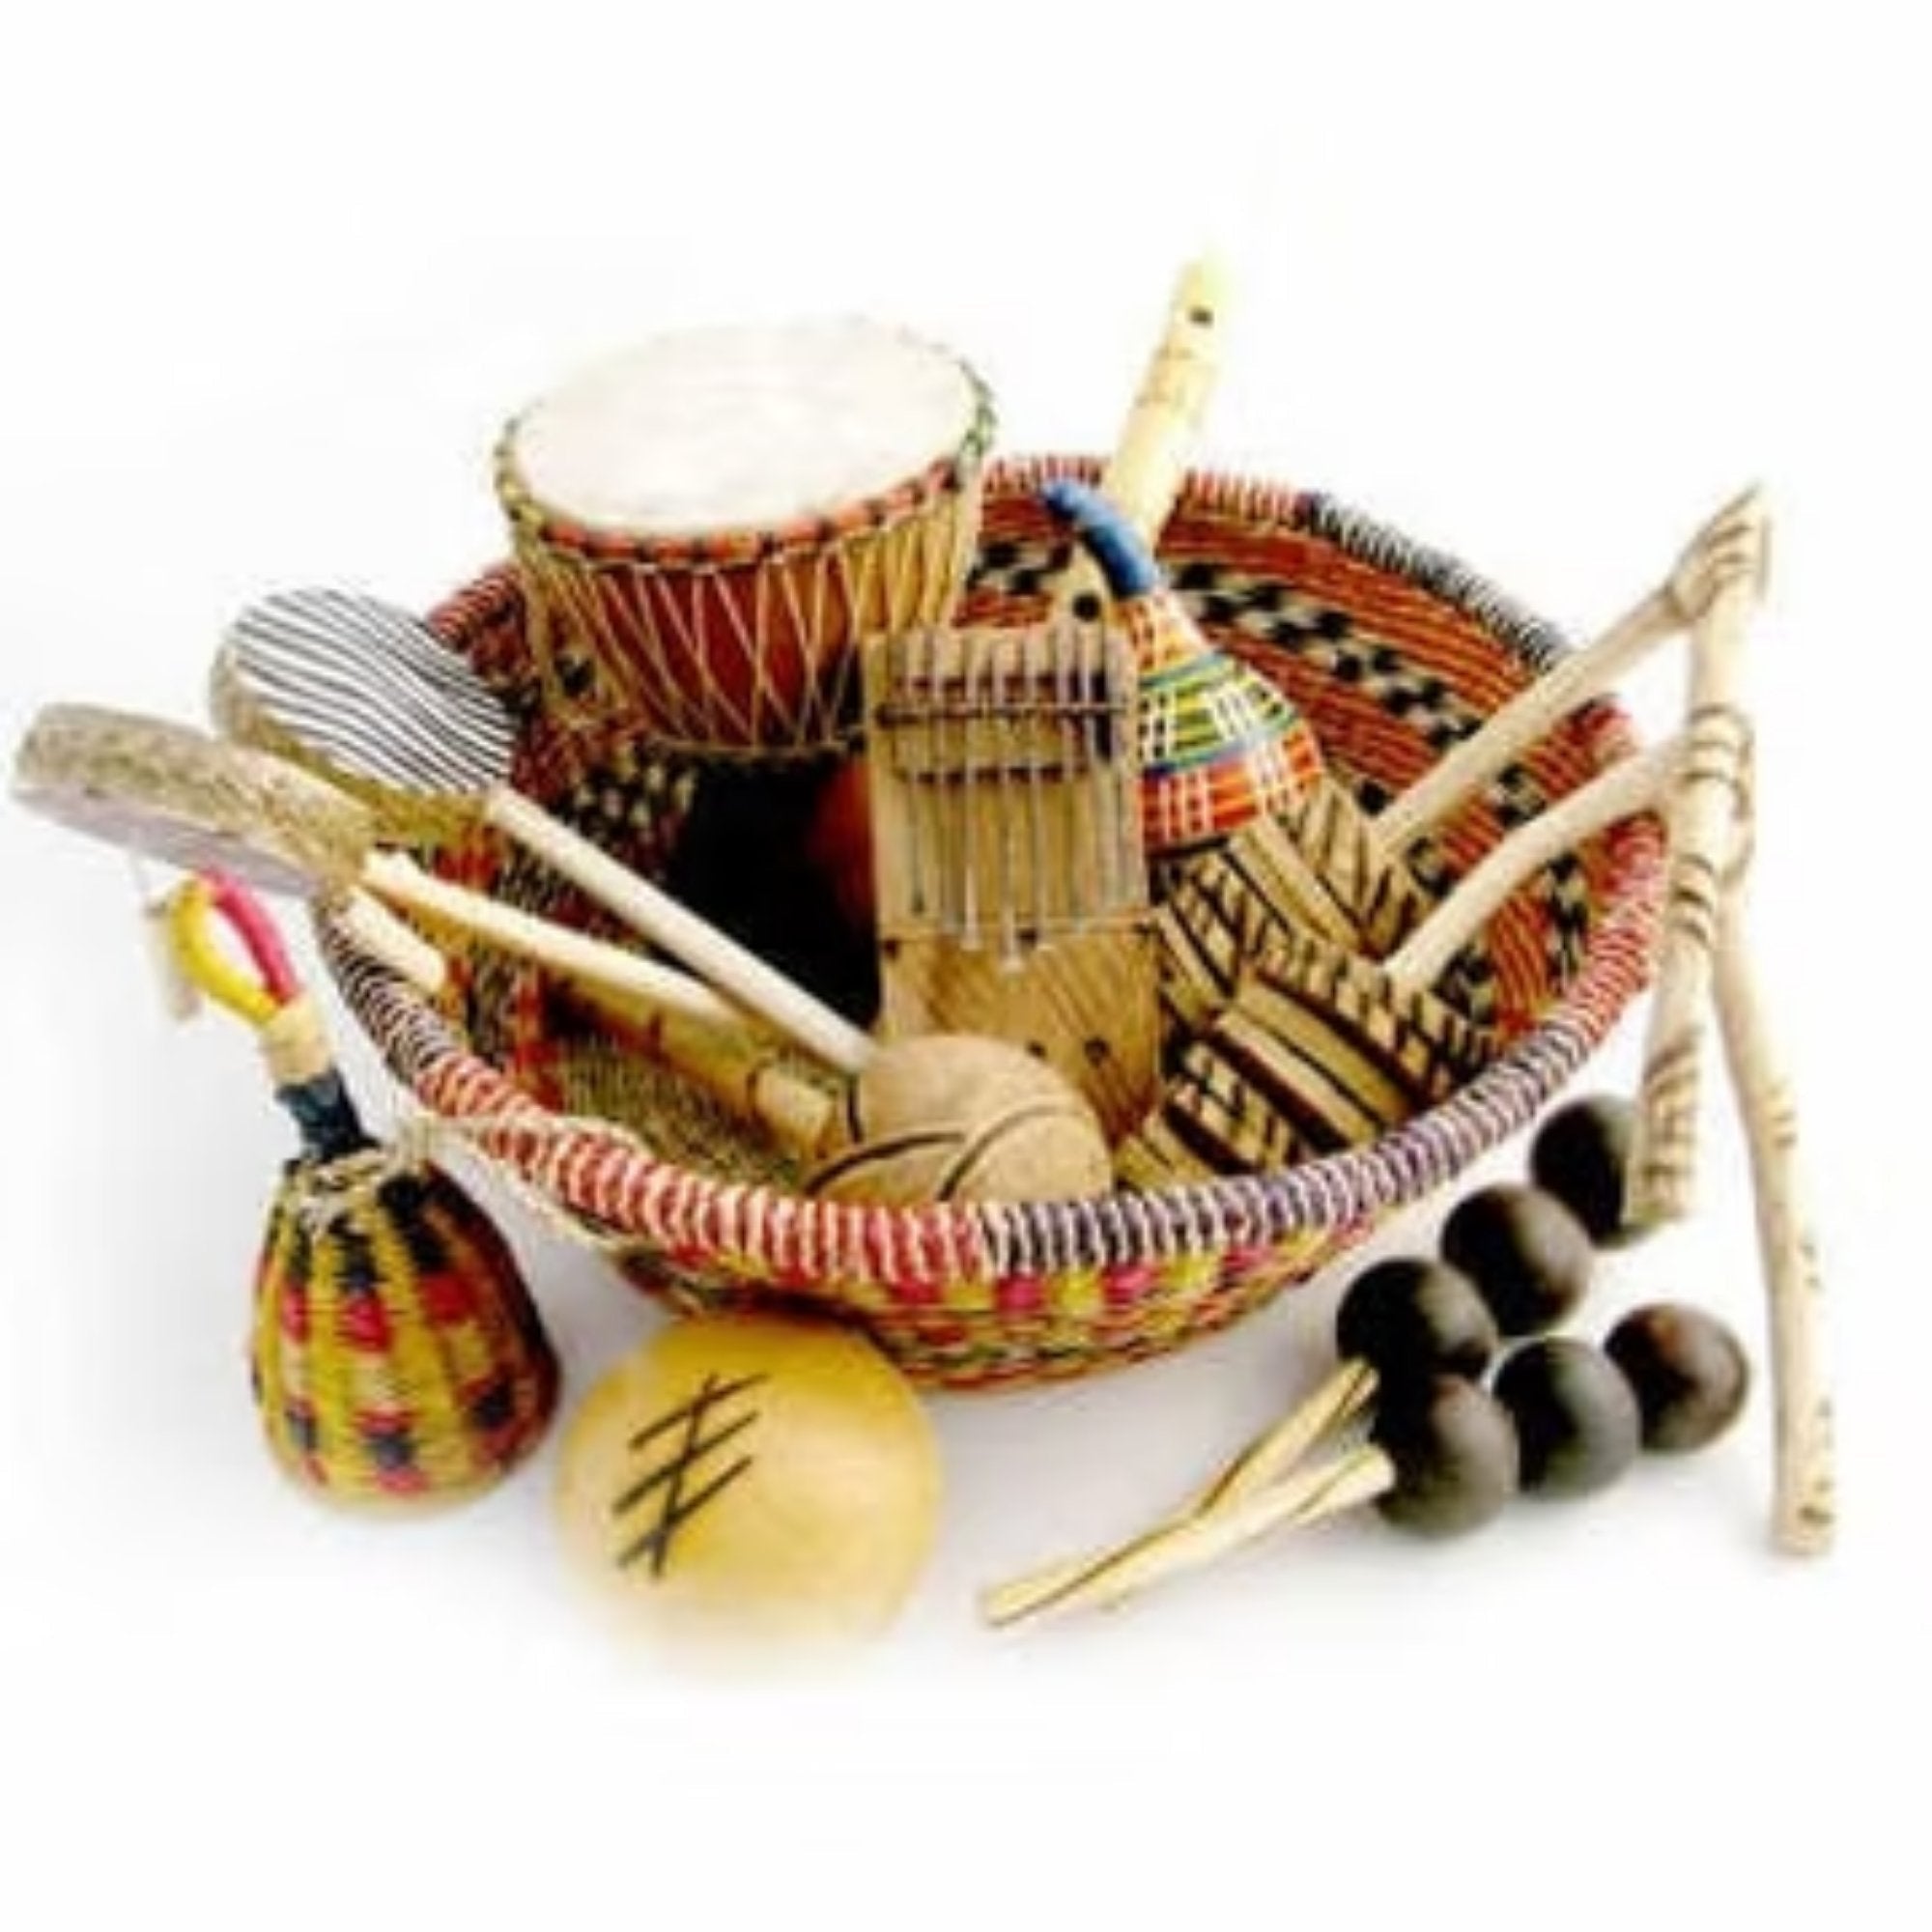 African Music Basket, The African Music Basket is not just an assortment of musical instruments; it's a cultural and ethical purchase that supports authentic craftsmanship and community wellbeing in Africa. Here are some notable features: Cultural Significance Authentic Instruments: Each African Music Basket contains 13 unique, handcrafted instruments originating from Africa, such as hosho maracas, a co-co shaker, caxixi, m’bira thumb piano, small djembe drum, rakataks, monkey drums, a Moroccan flute, a gou